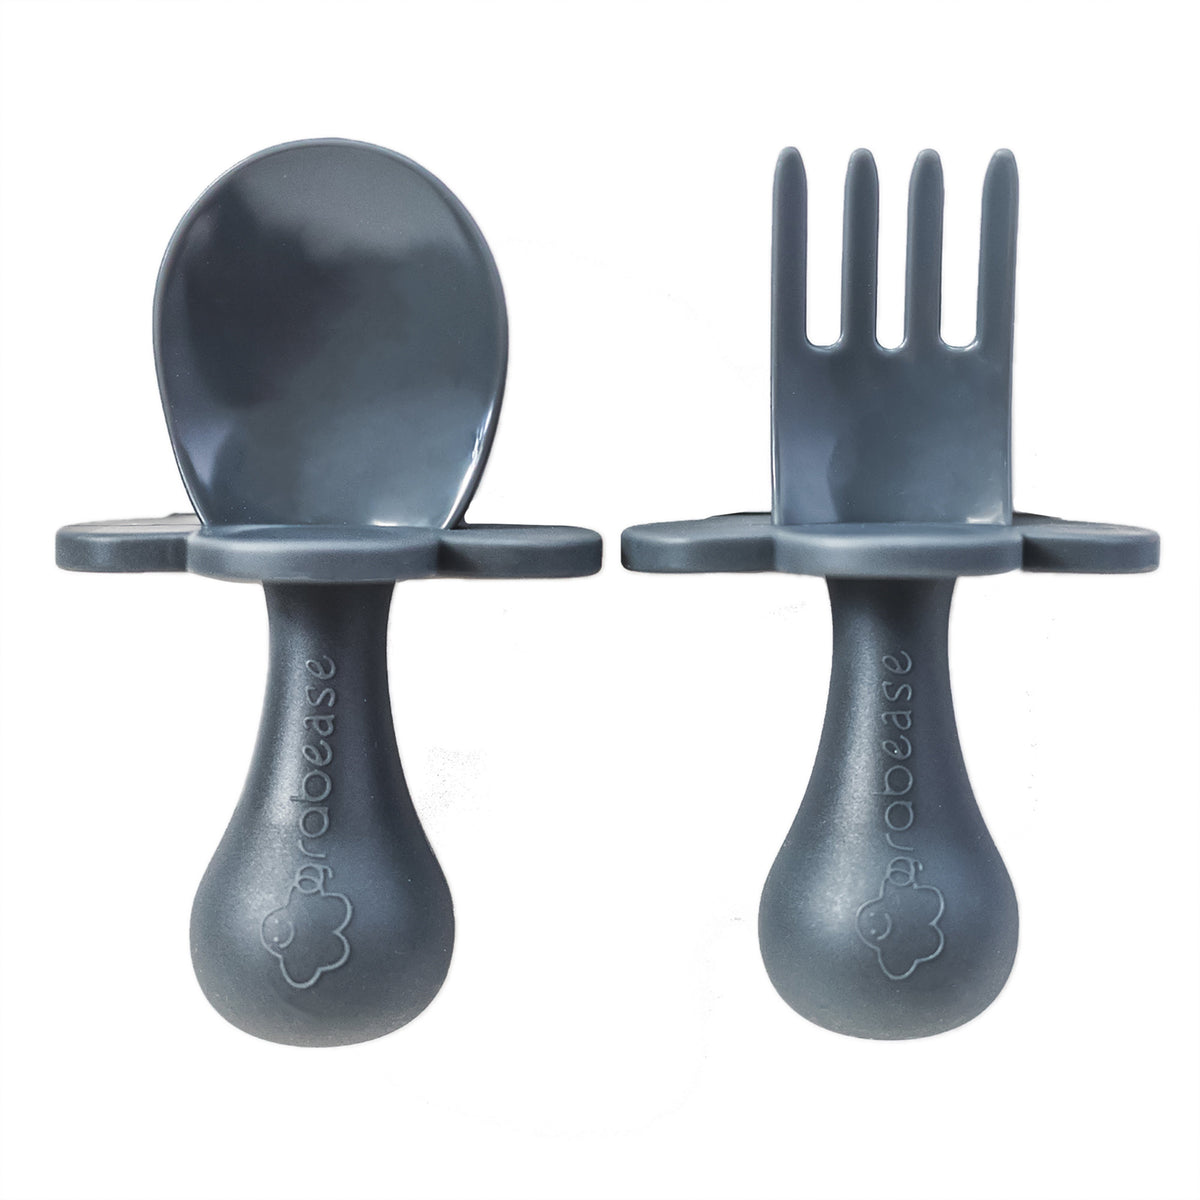 grabease-fork-and-spoon-set-gray- (1)